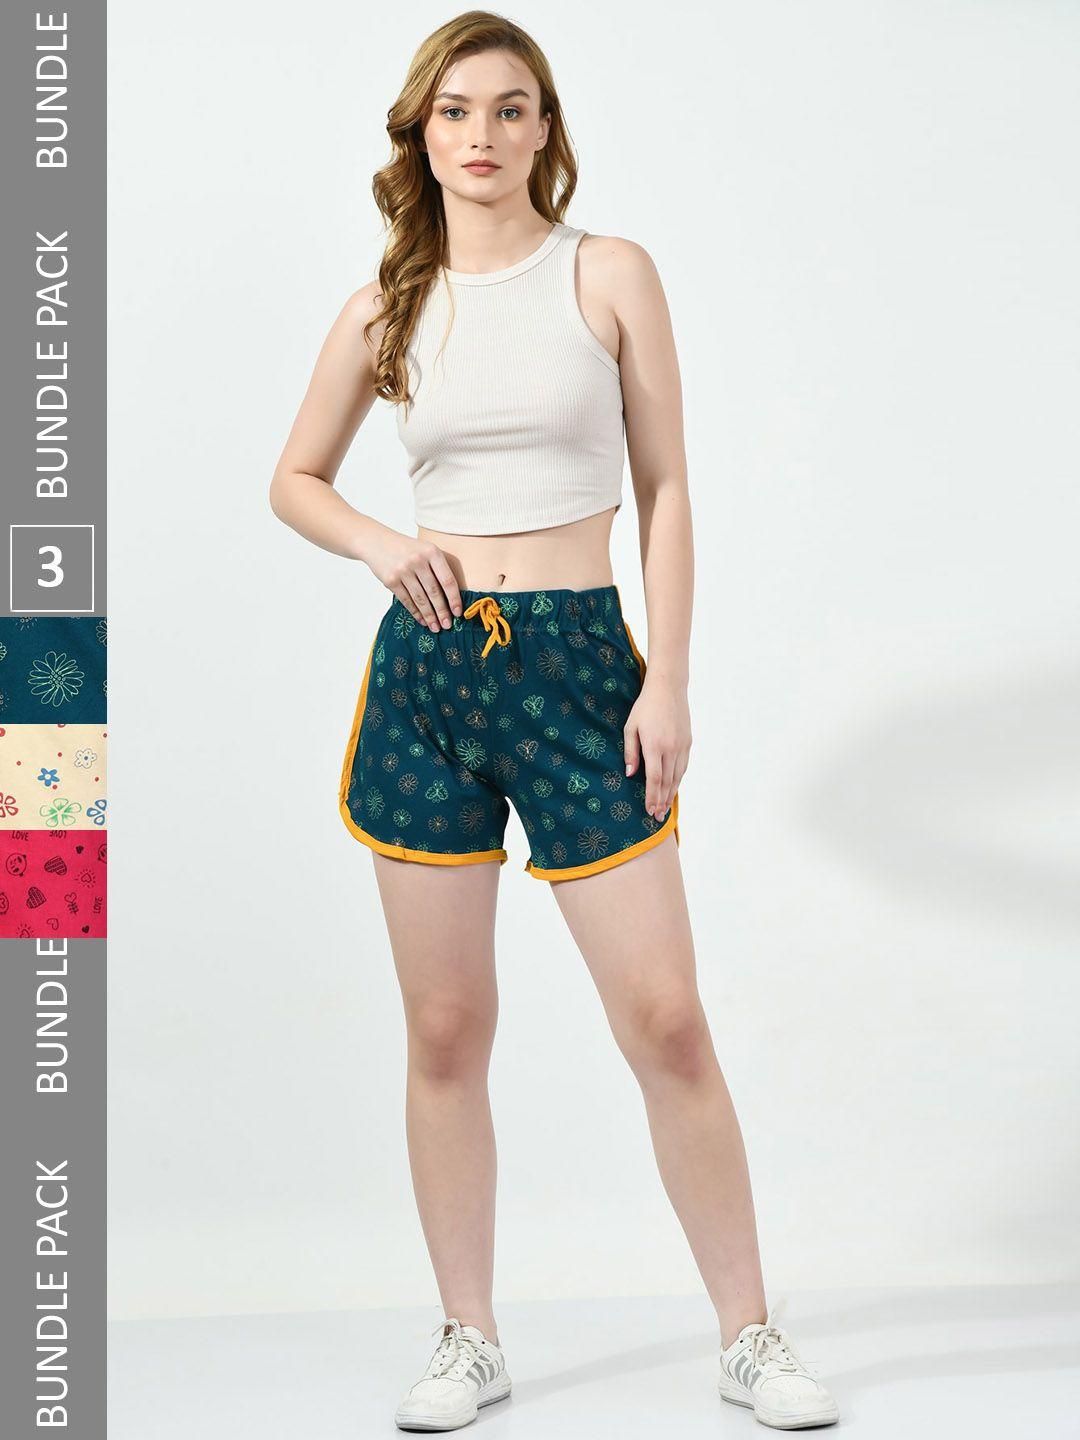 baesd-pack-of-3-printed-pure-cotton-hot-pants-shorts